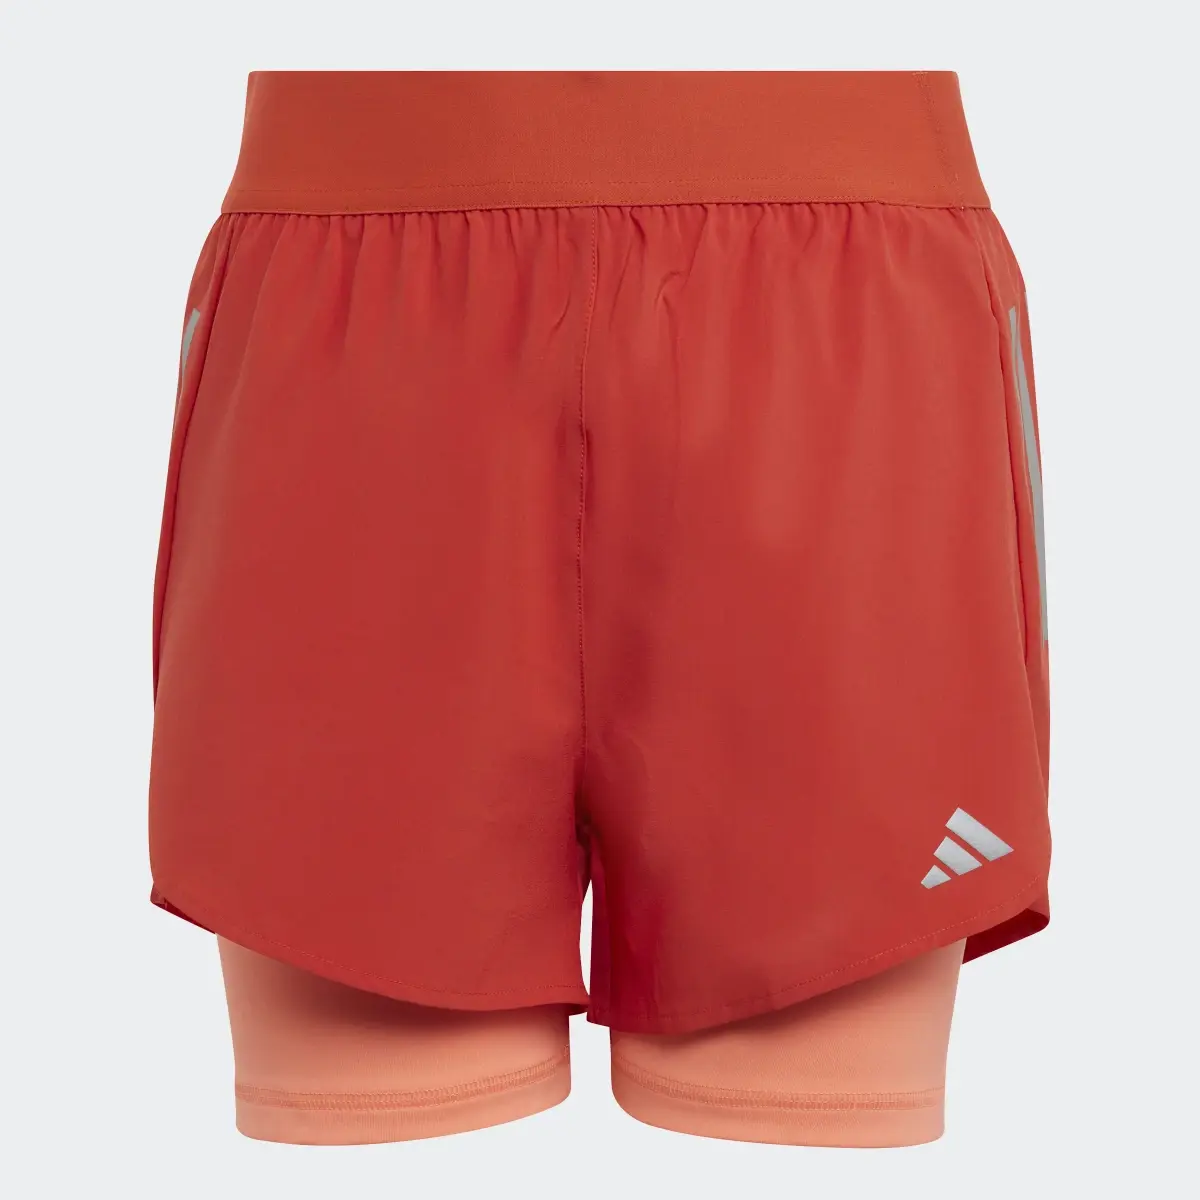 Adidas Short Two-In-One AEROREADY Woven. 1